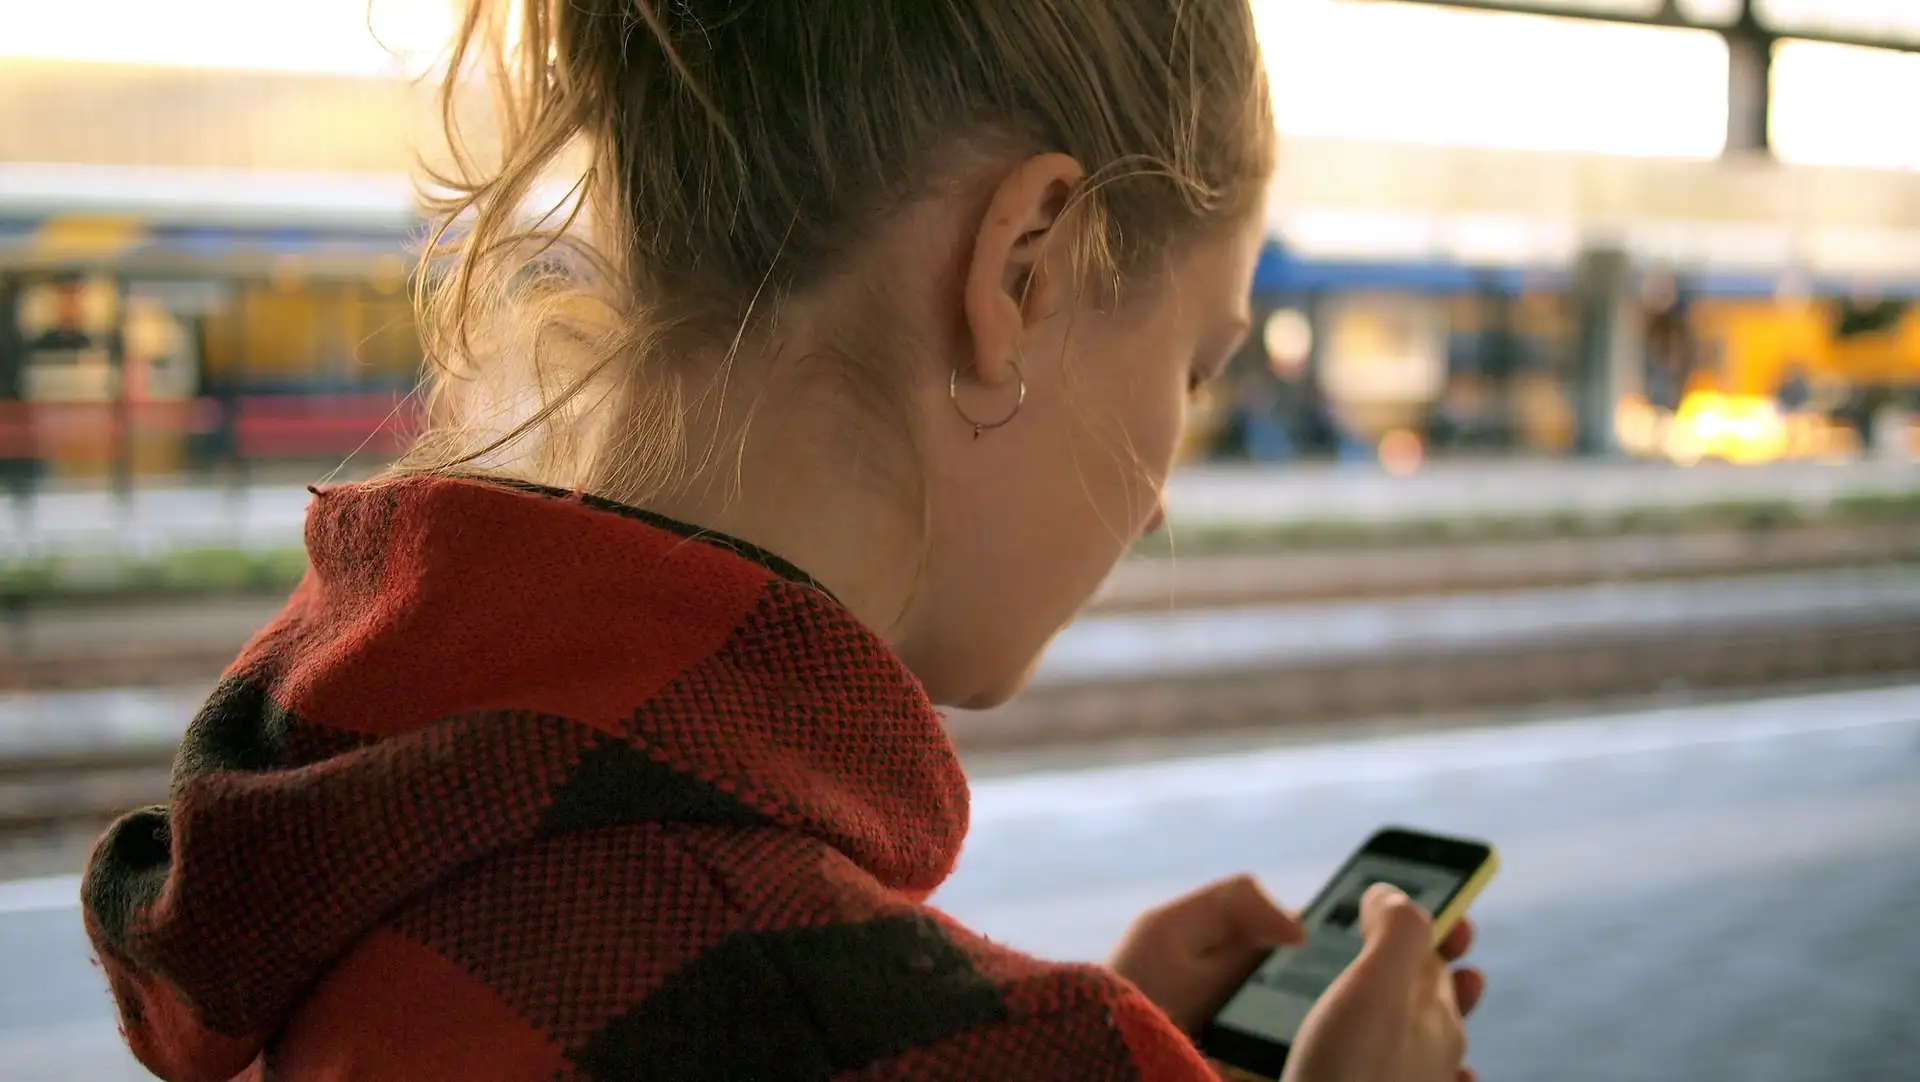 A woman on her phone while walking outside, showing one of the factors to consider when creating a mobile SEO strategy